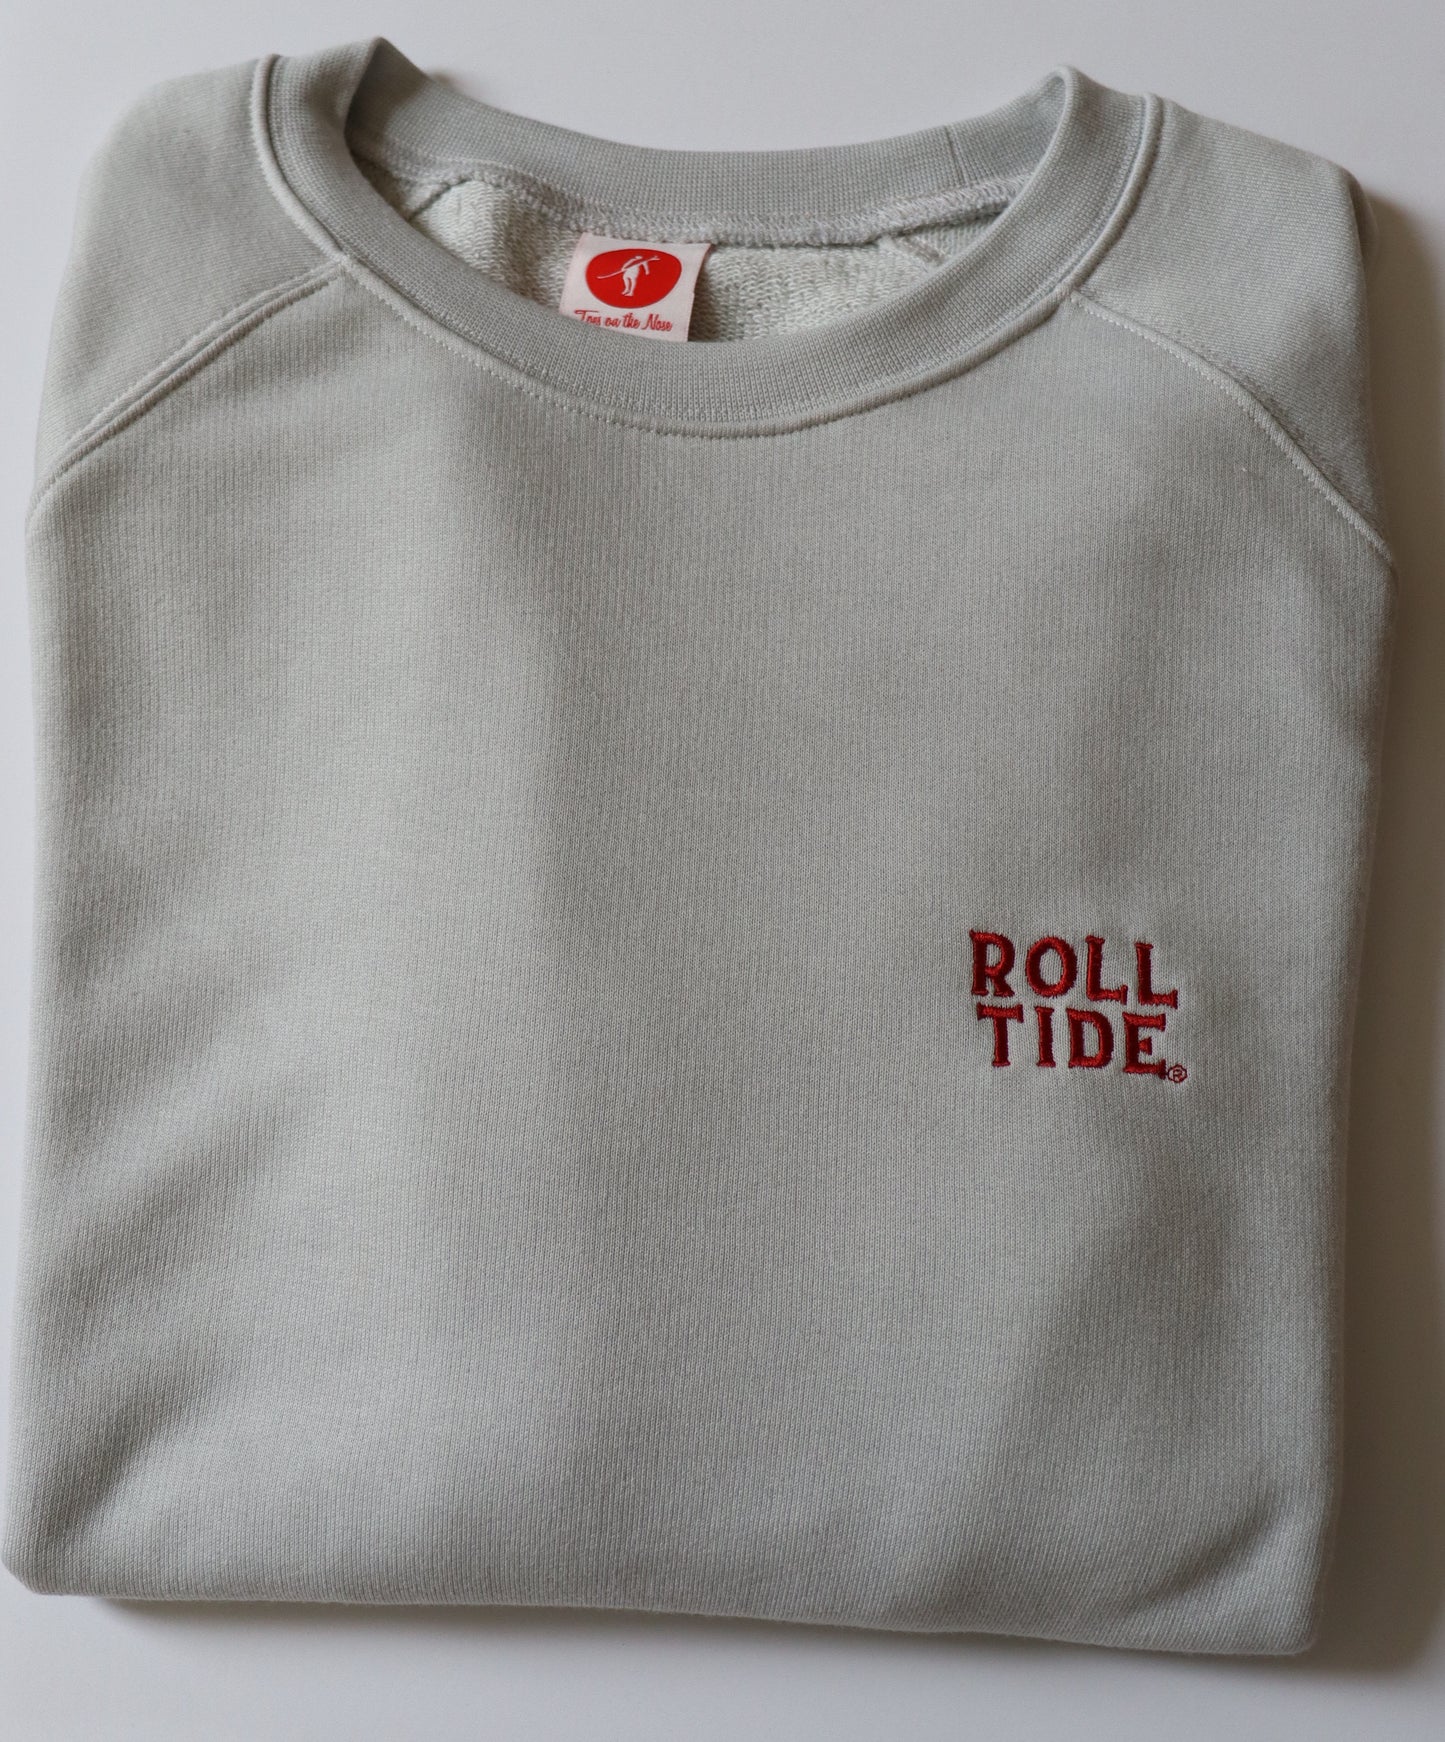 Toes On The Nose Coastal Crew "Roll Tide"